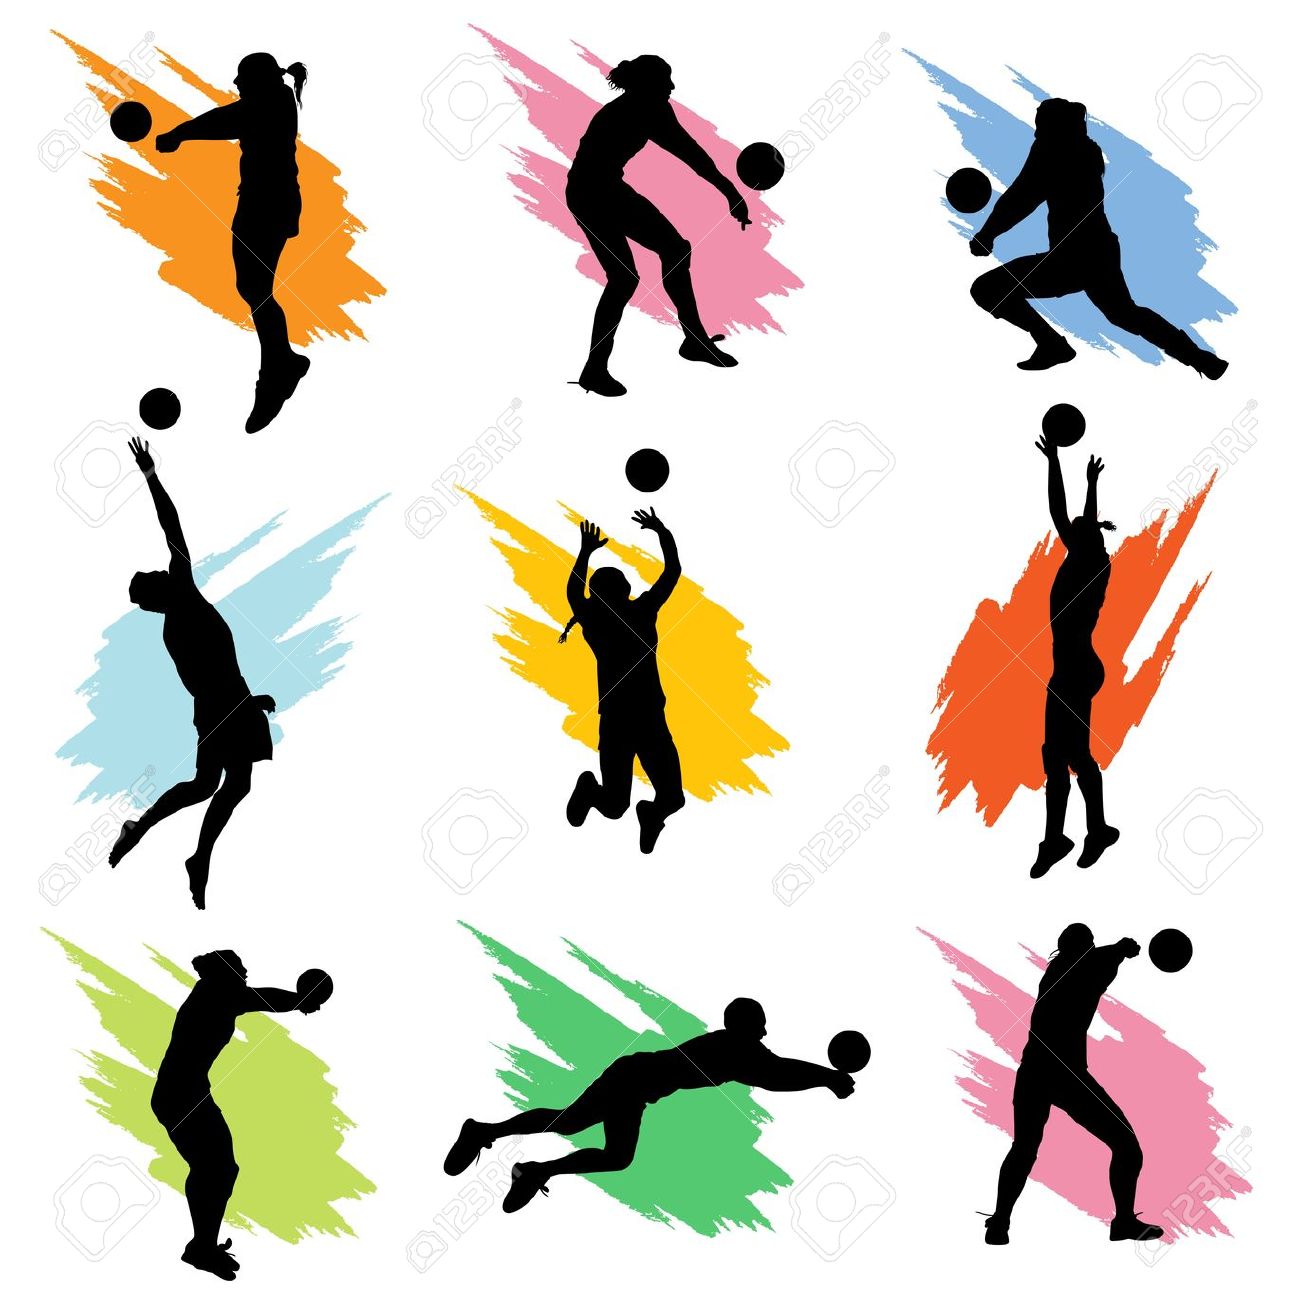 free volleyball clipart vector - photo #43